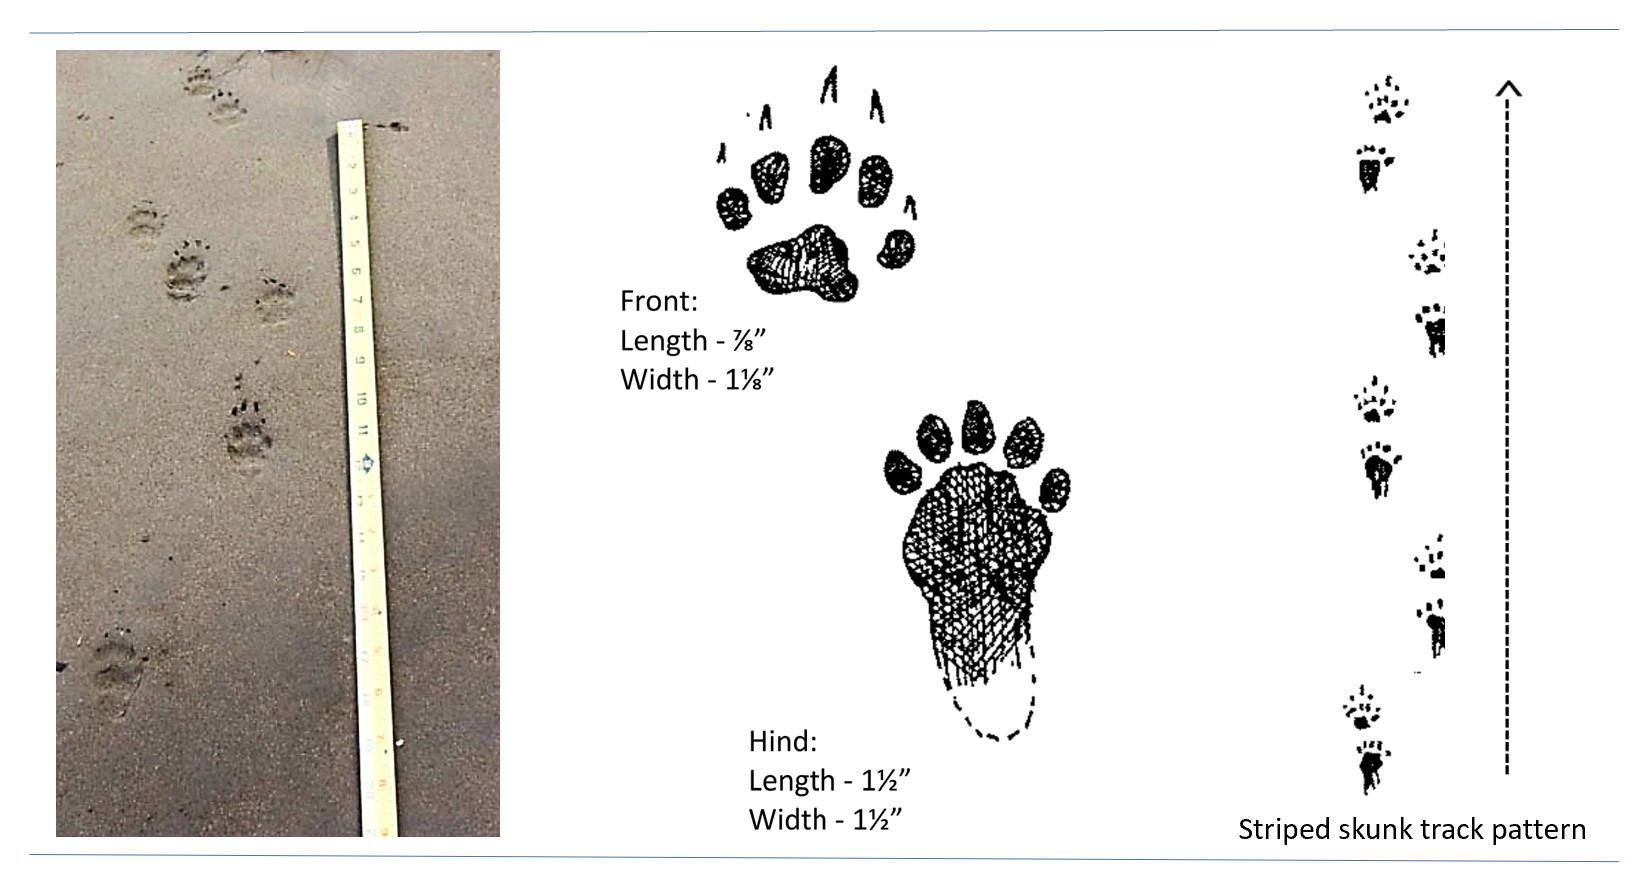 Photo and illustrated tracks of a striped skunk.